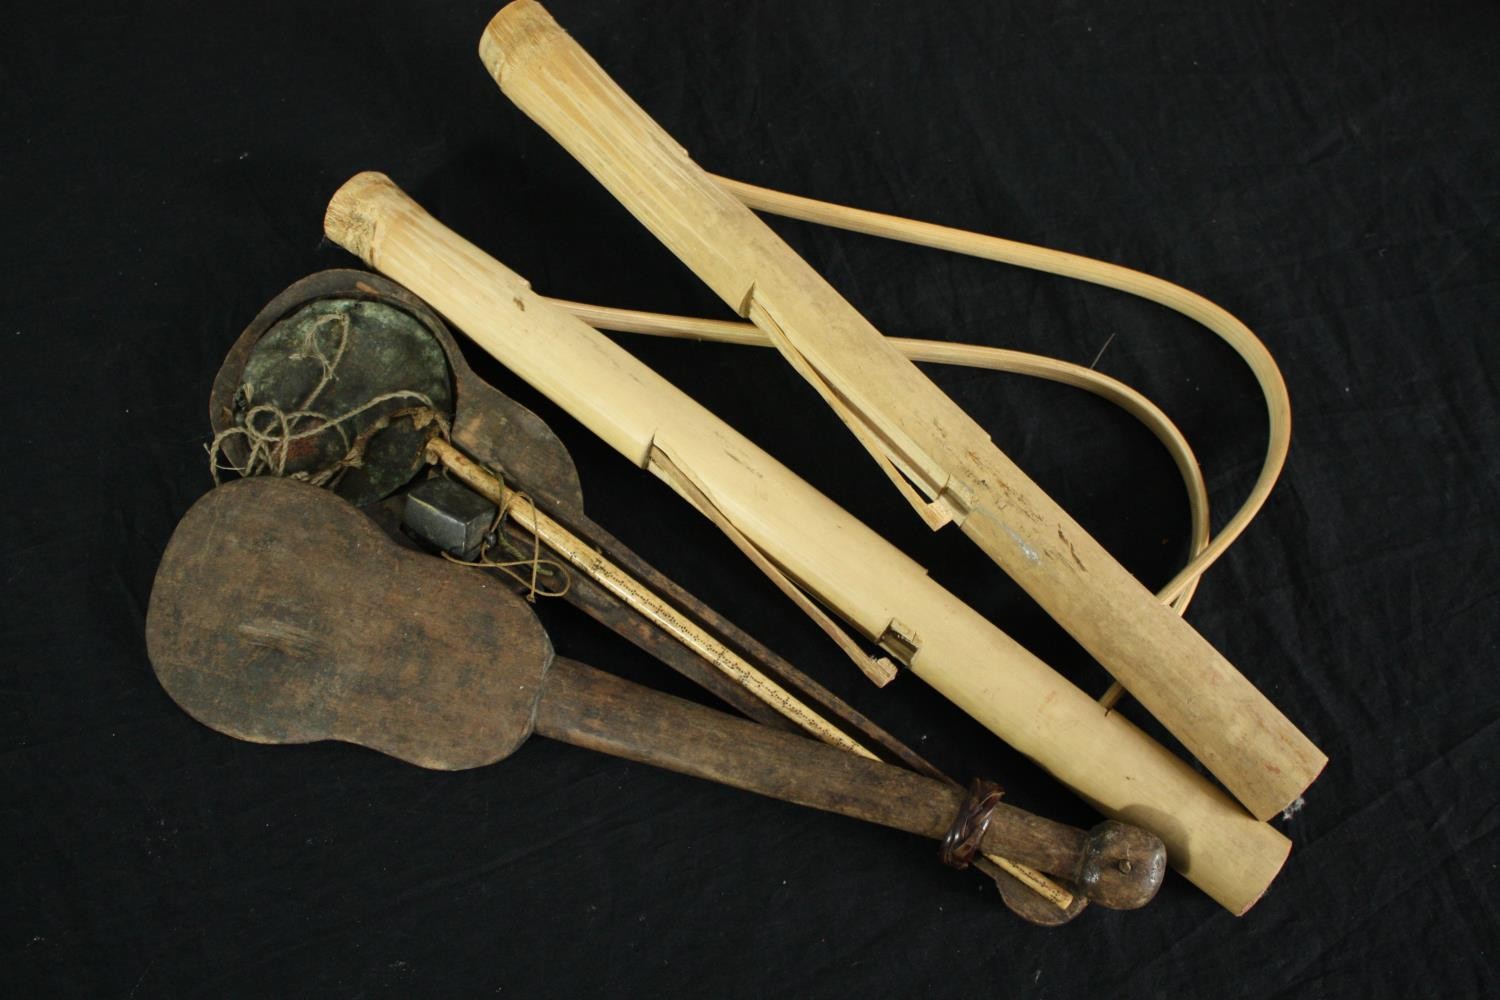 A 19th century Dotchin Opium scale, with brass scale and bone marker along with a bamboo snap gun.